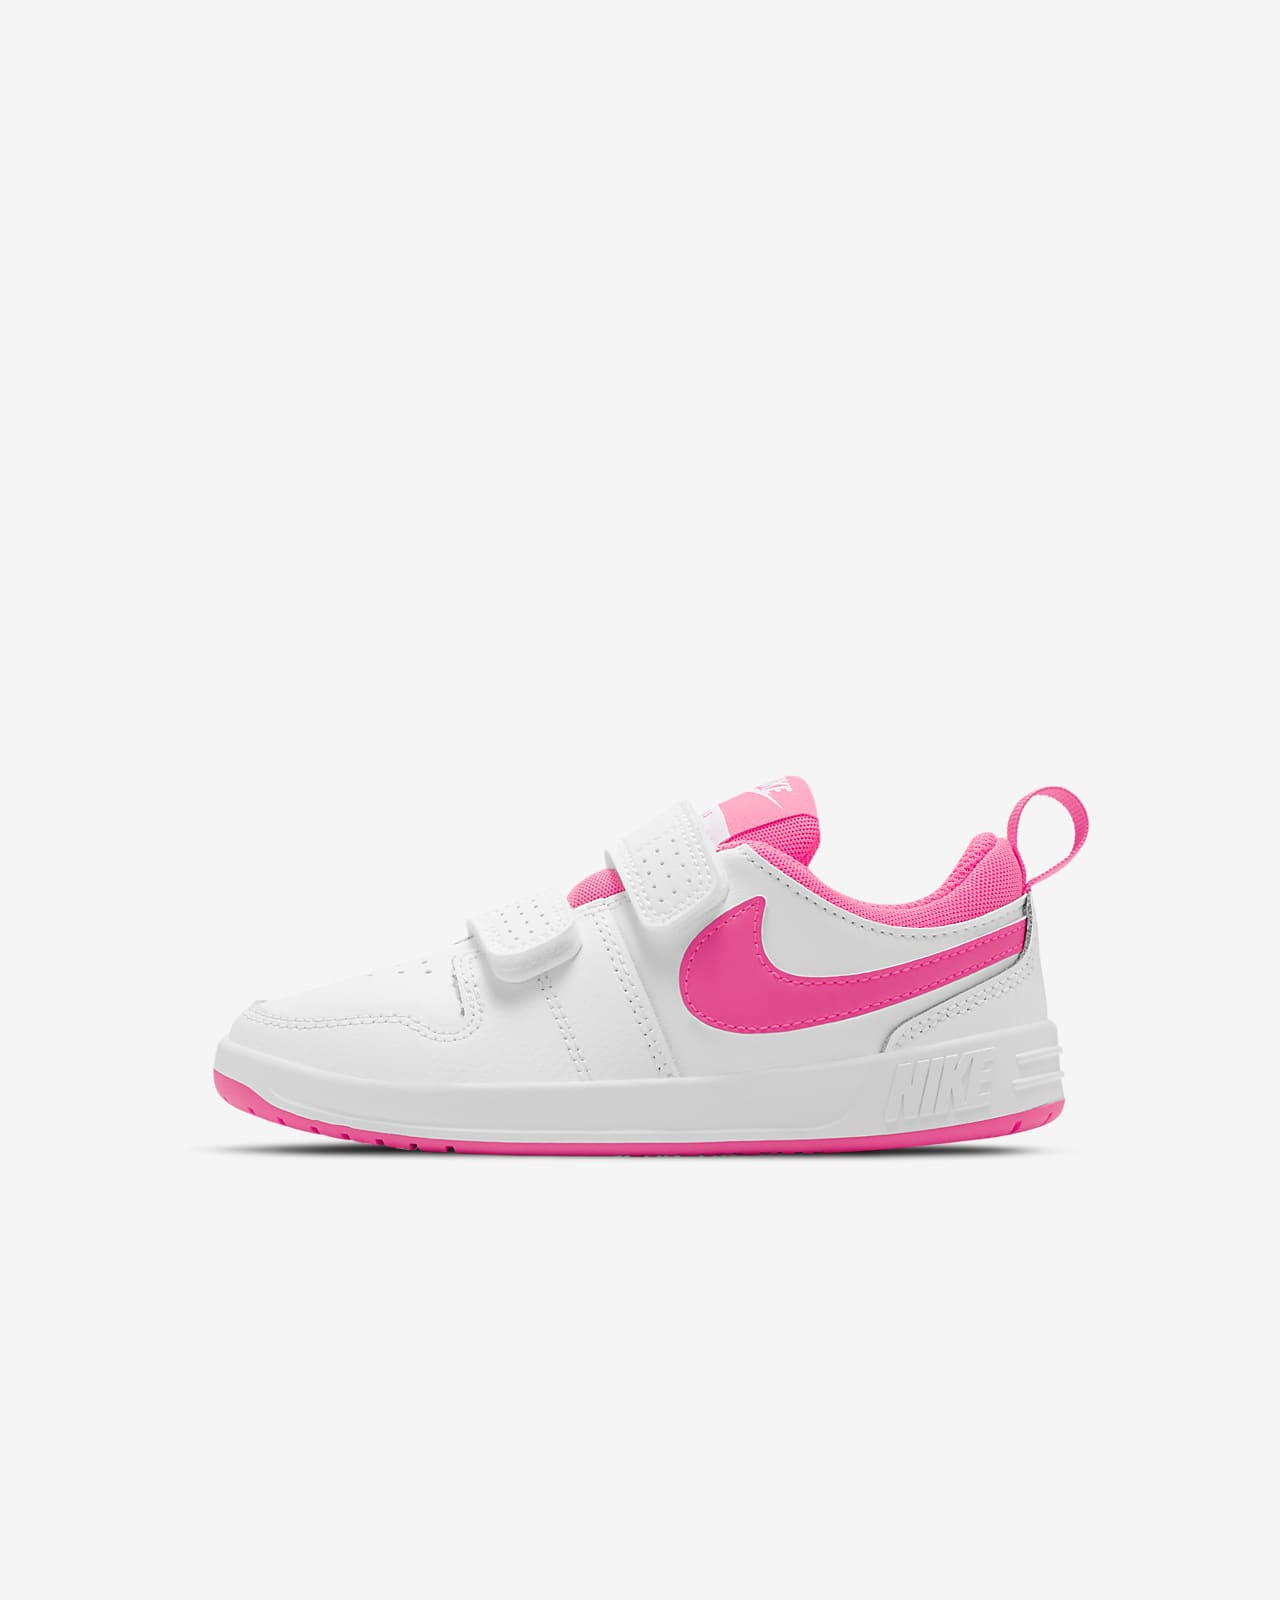 nike younger kids size guide